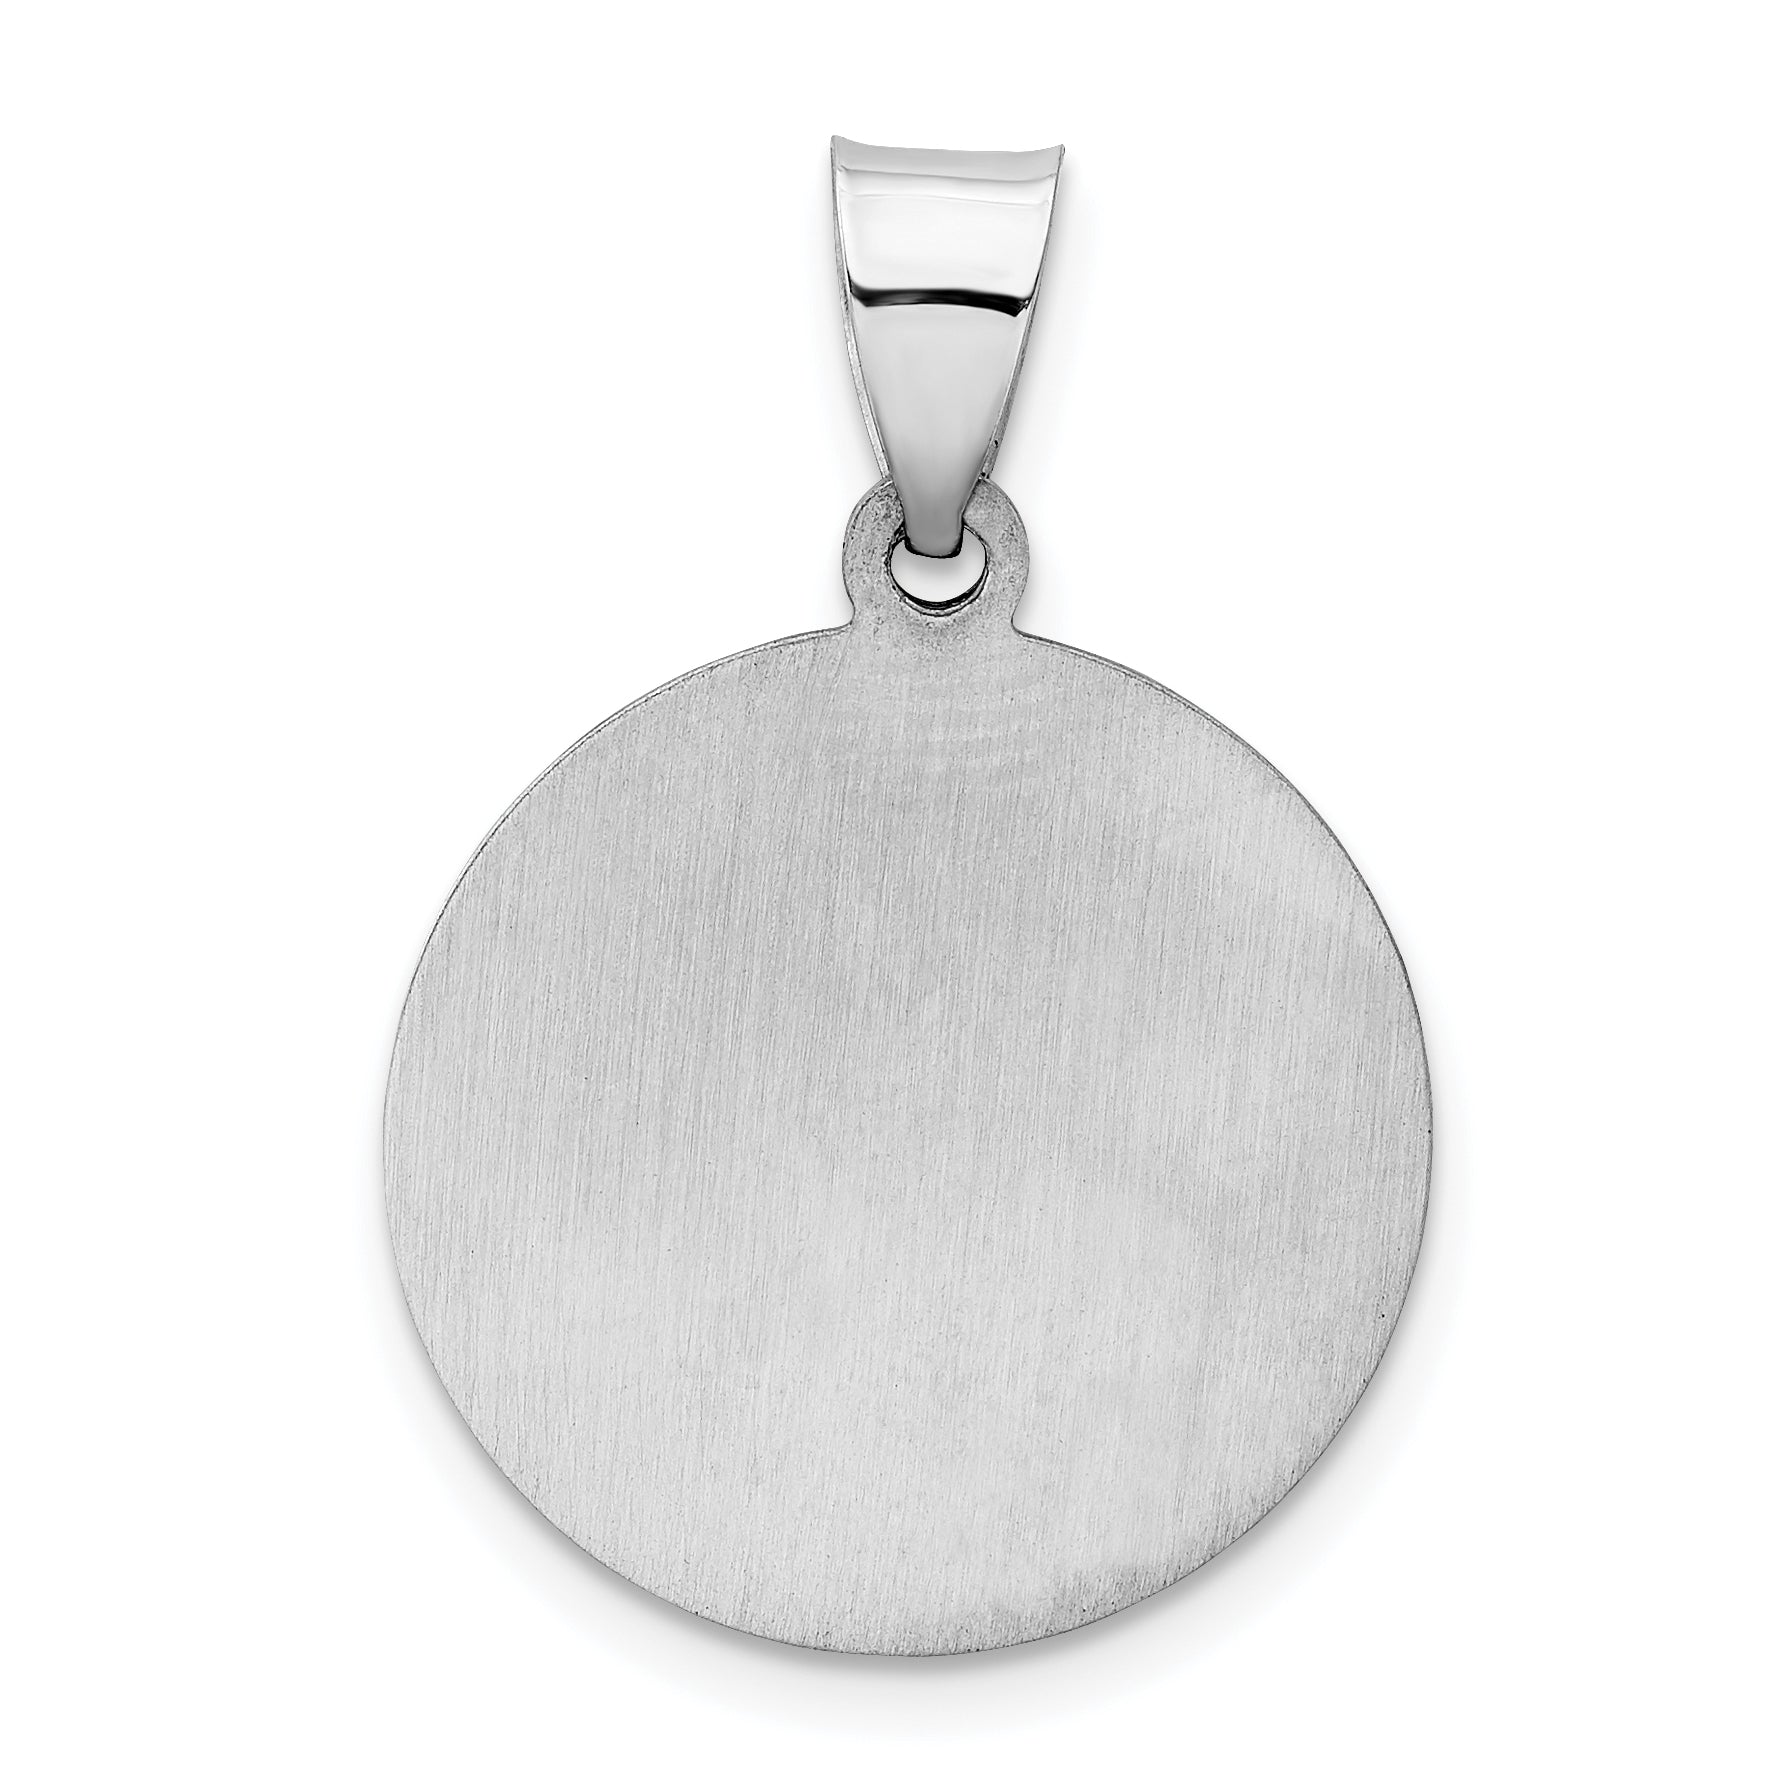 14K White Gold Lady of Guadalupe Medal Hollow Pendant